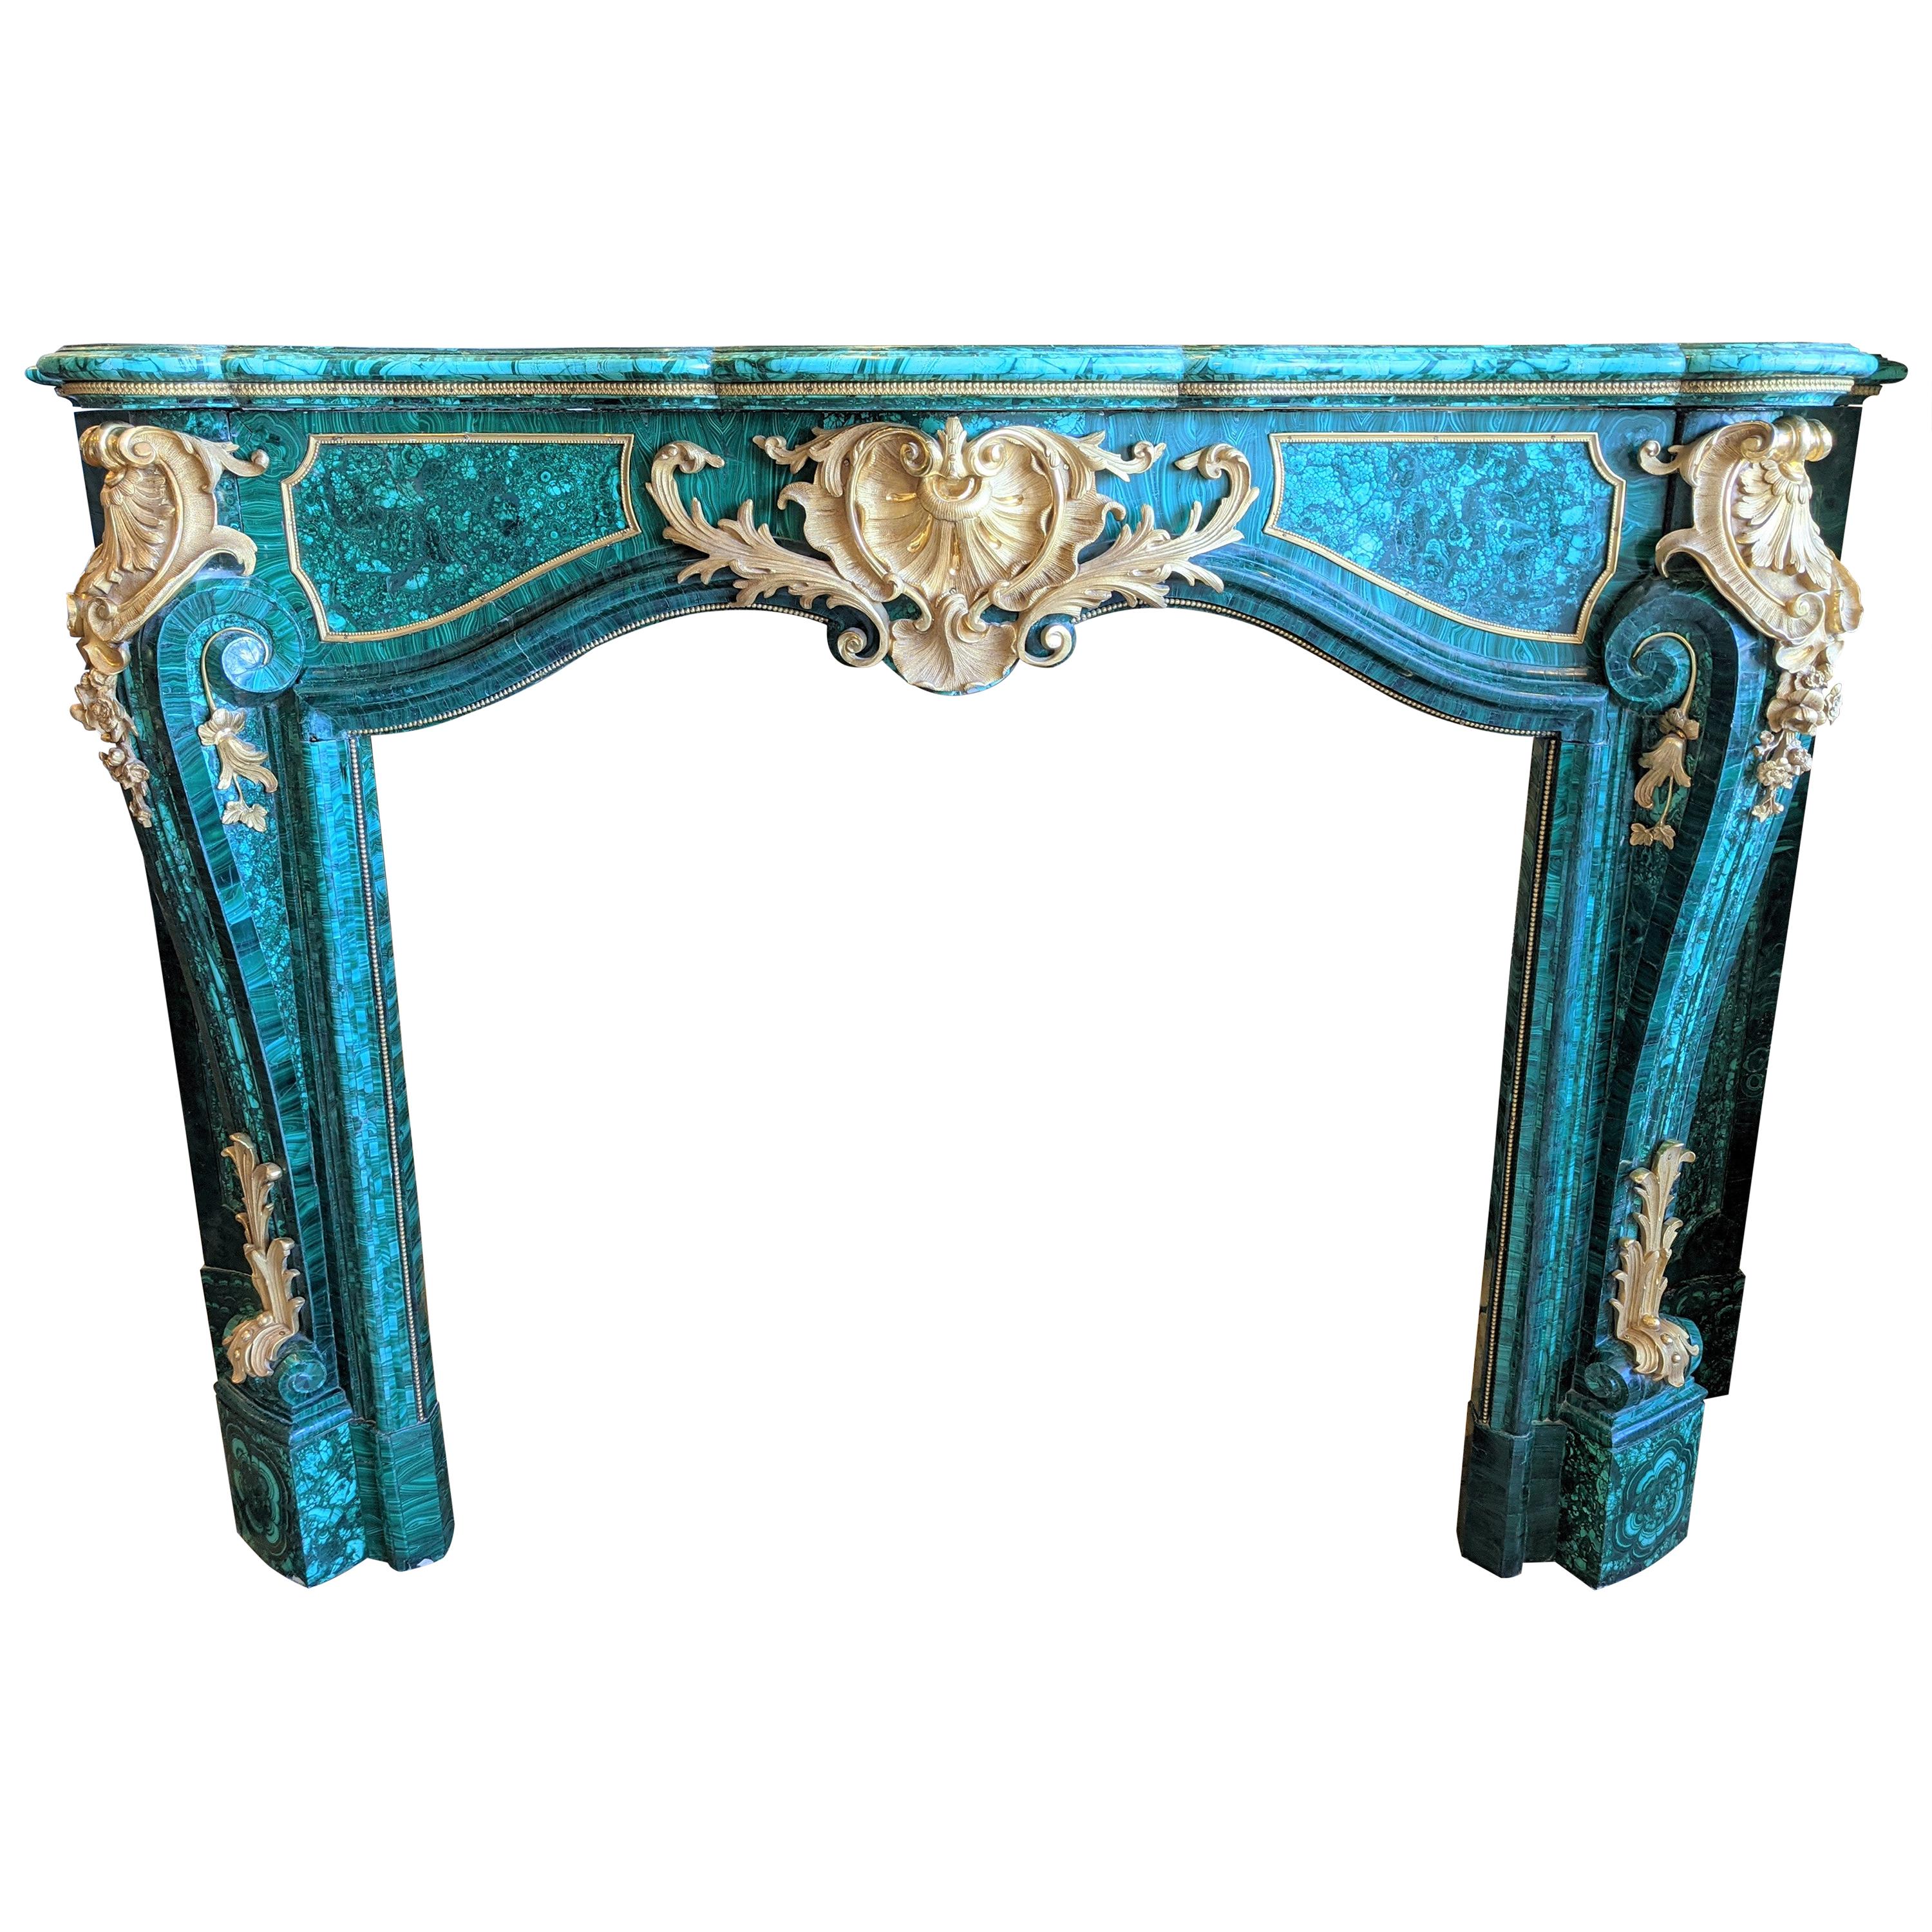 Louis XIV Style Gilt Bronze and Malachite Fireplace For Sale at 1stDibs